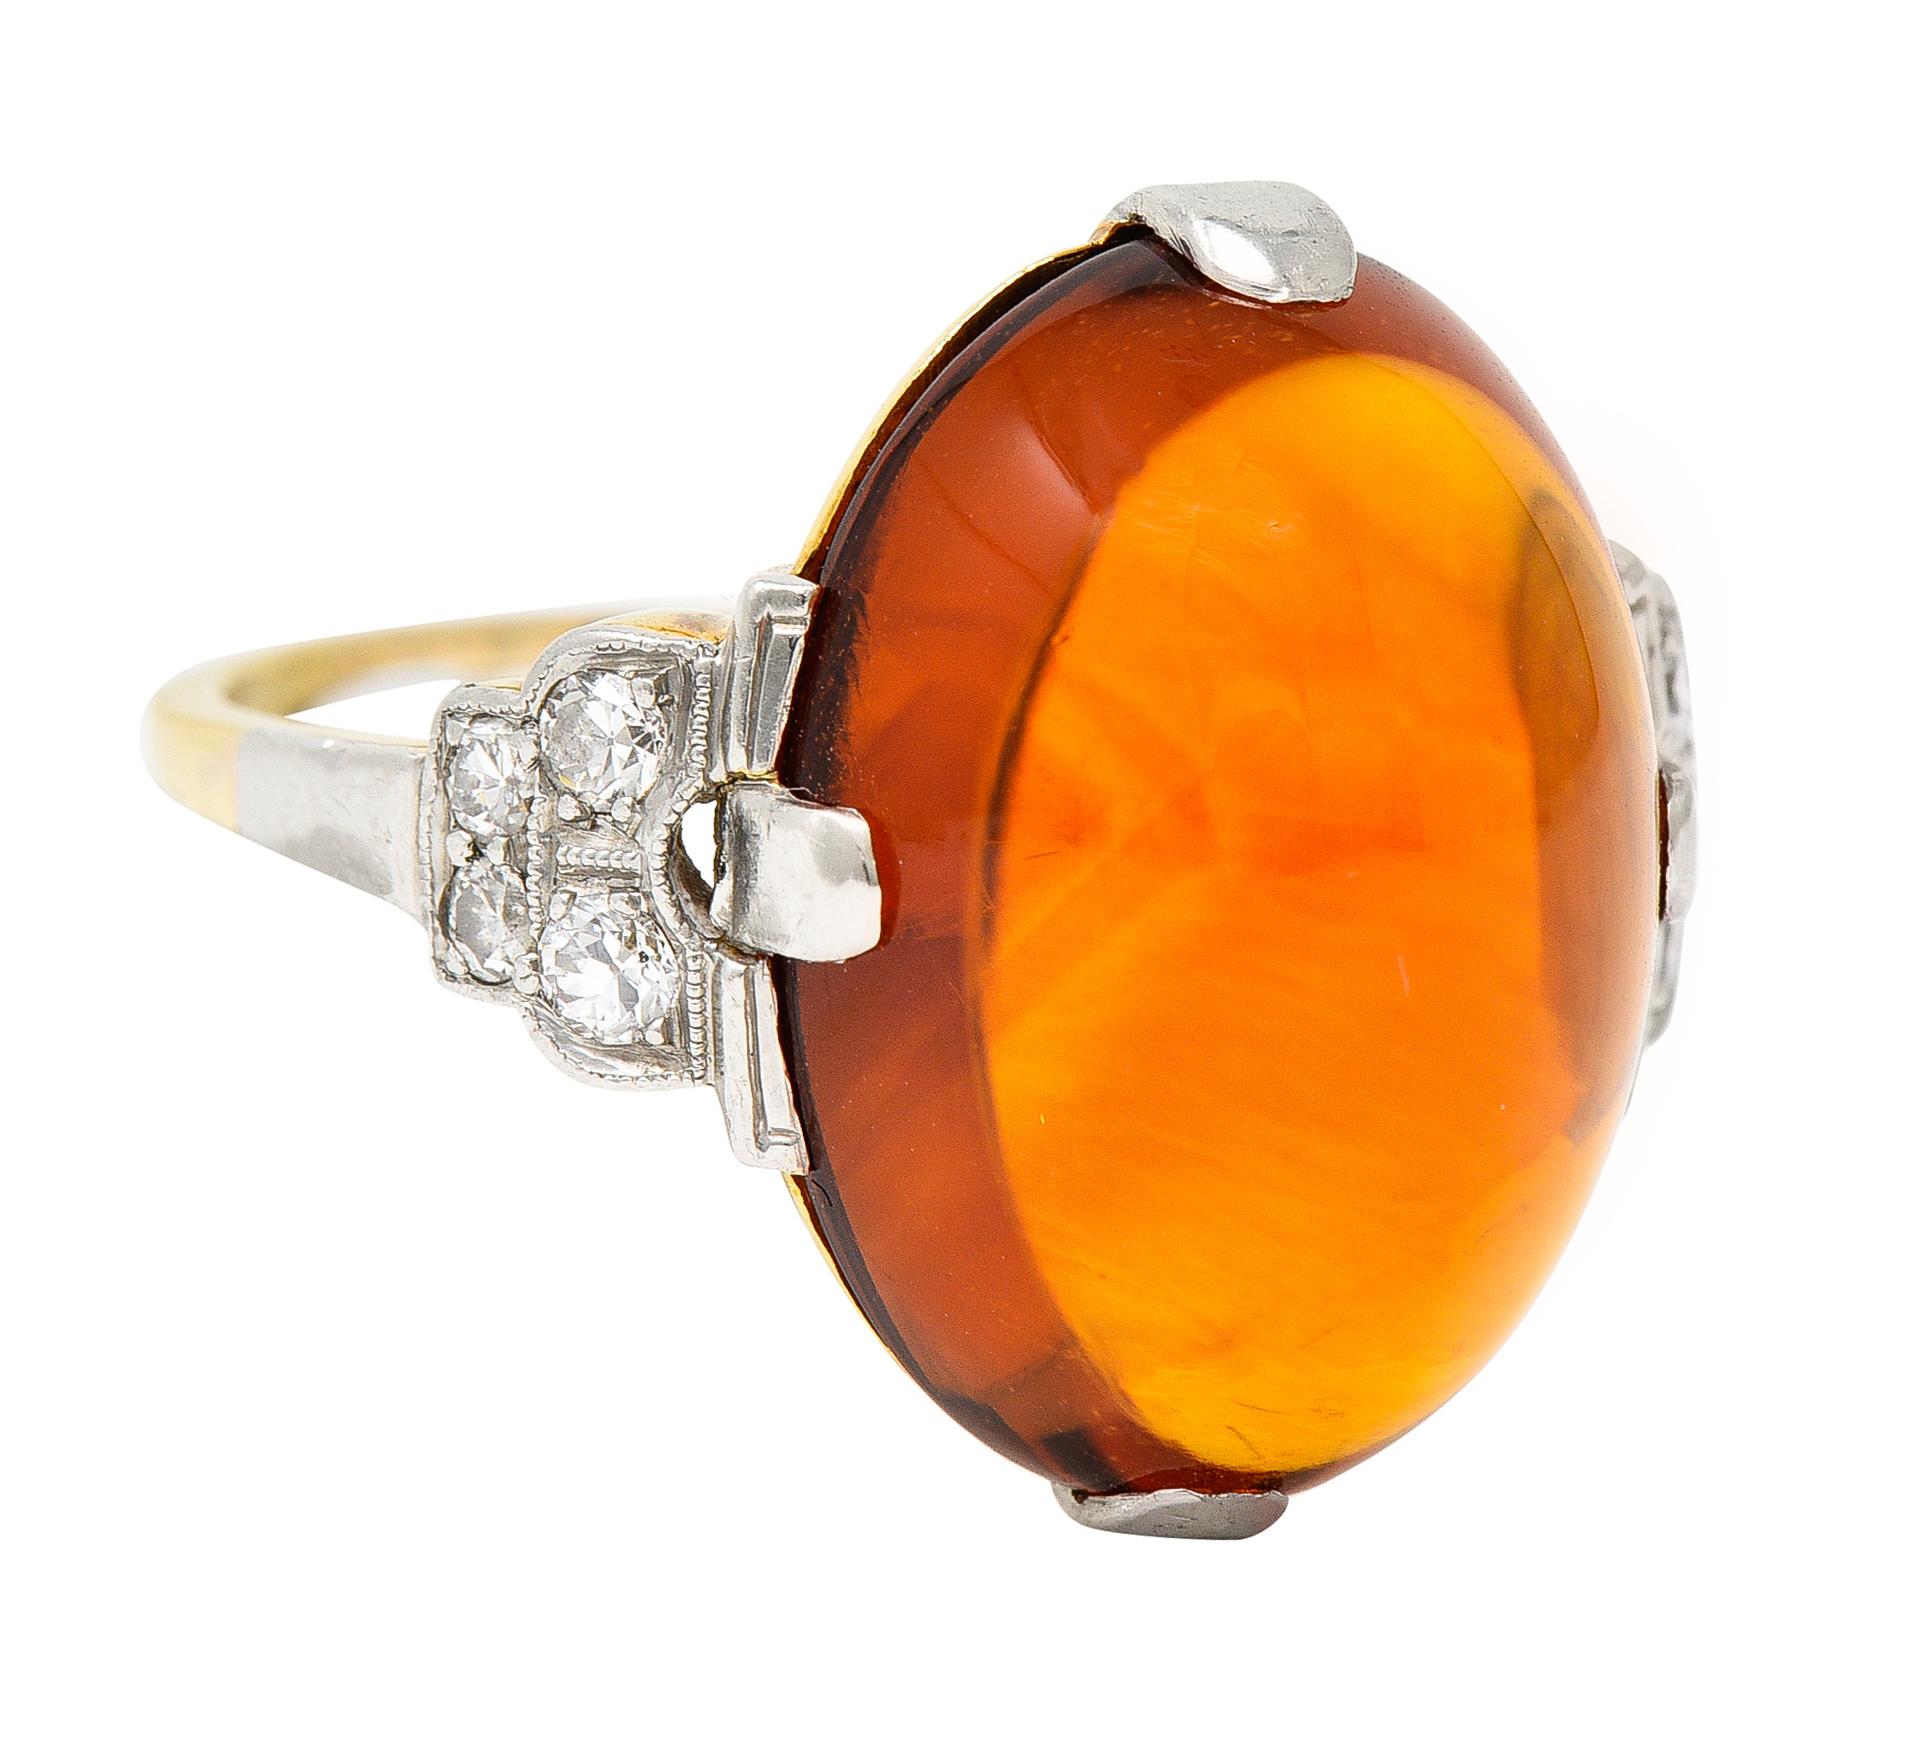 Centering an oval citrine cabochon measuring 13.0 x 18.0 mm - transparent medium reddish orange. Set with wide platinum prongs and flanked by platinum topped shoulders. With bead set single cut diamonds weighing approximately 0.30 carat total. Eye